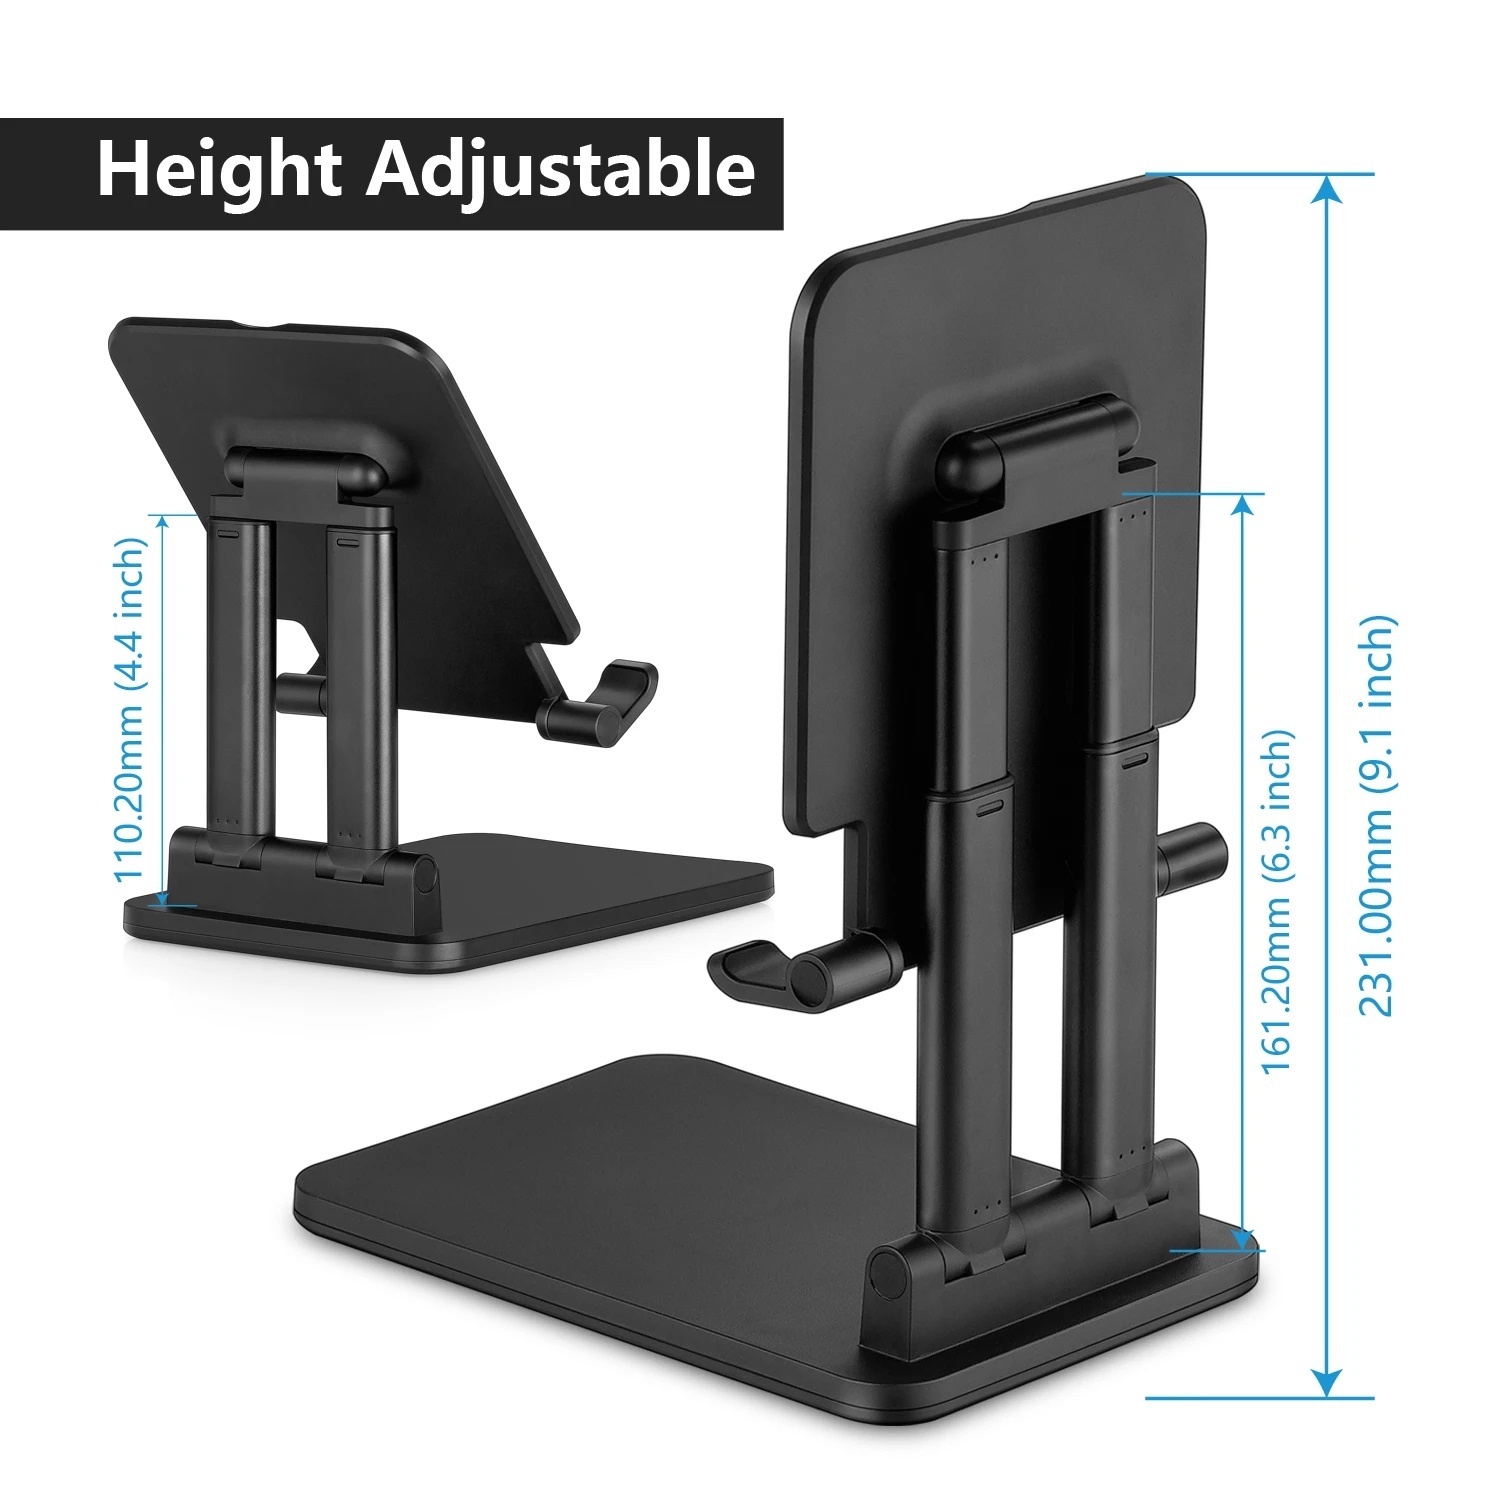 SSS-T6 Solid Sturdy Stand Monitor Stand  PEPPER JOBS EU - Official  authorized EU Distributor of PEPPER JOBS products Digital Signage Kiosk  players X28-i and X99-i